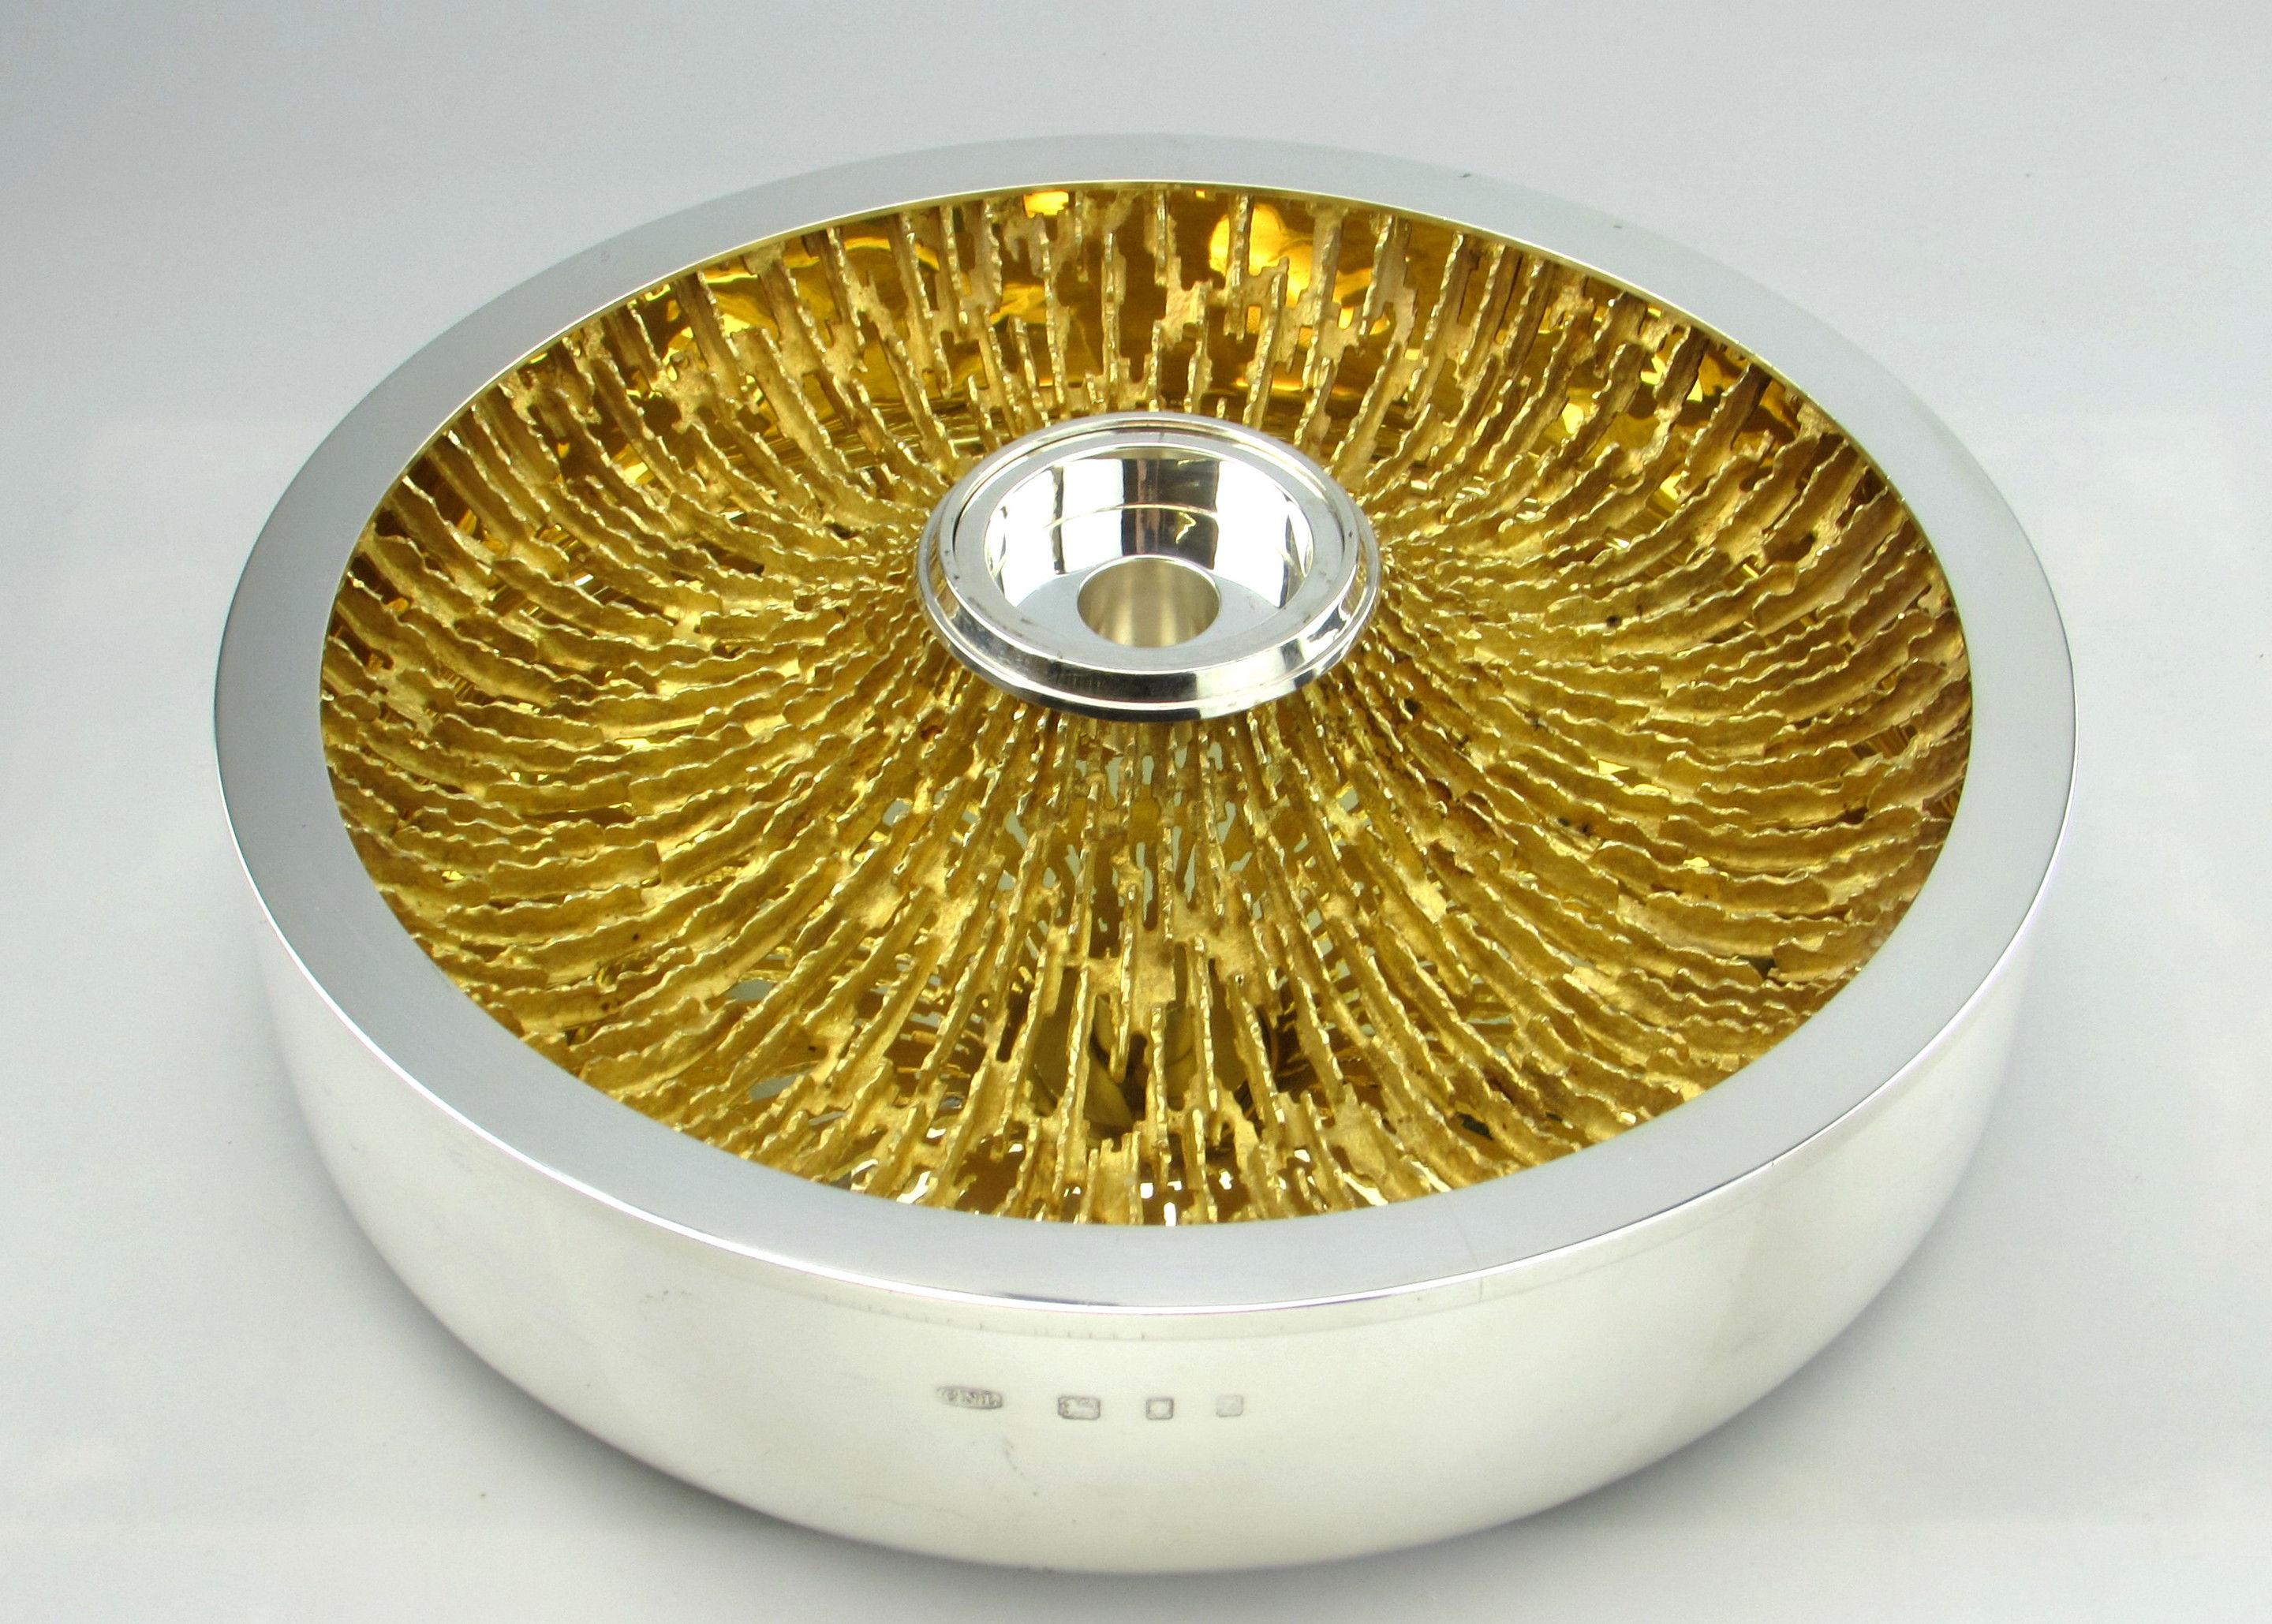 A spectacular large Modernist Solid Silver & Silver Gilt Centre Piece or Bowl with an adaptable candle holder in the centre. This centre piece is created by the preeminent Modernist Silversmith Christopher Lawrence in his quintessential style. The